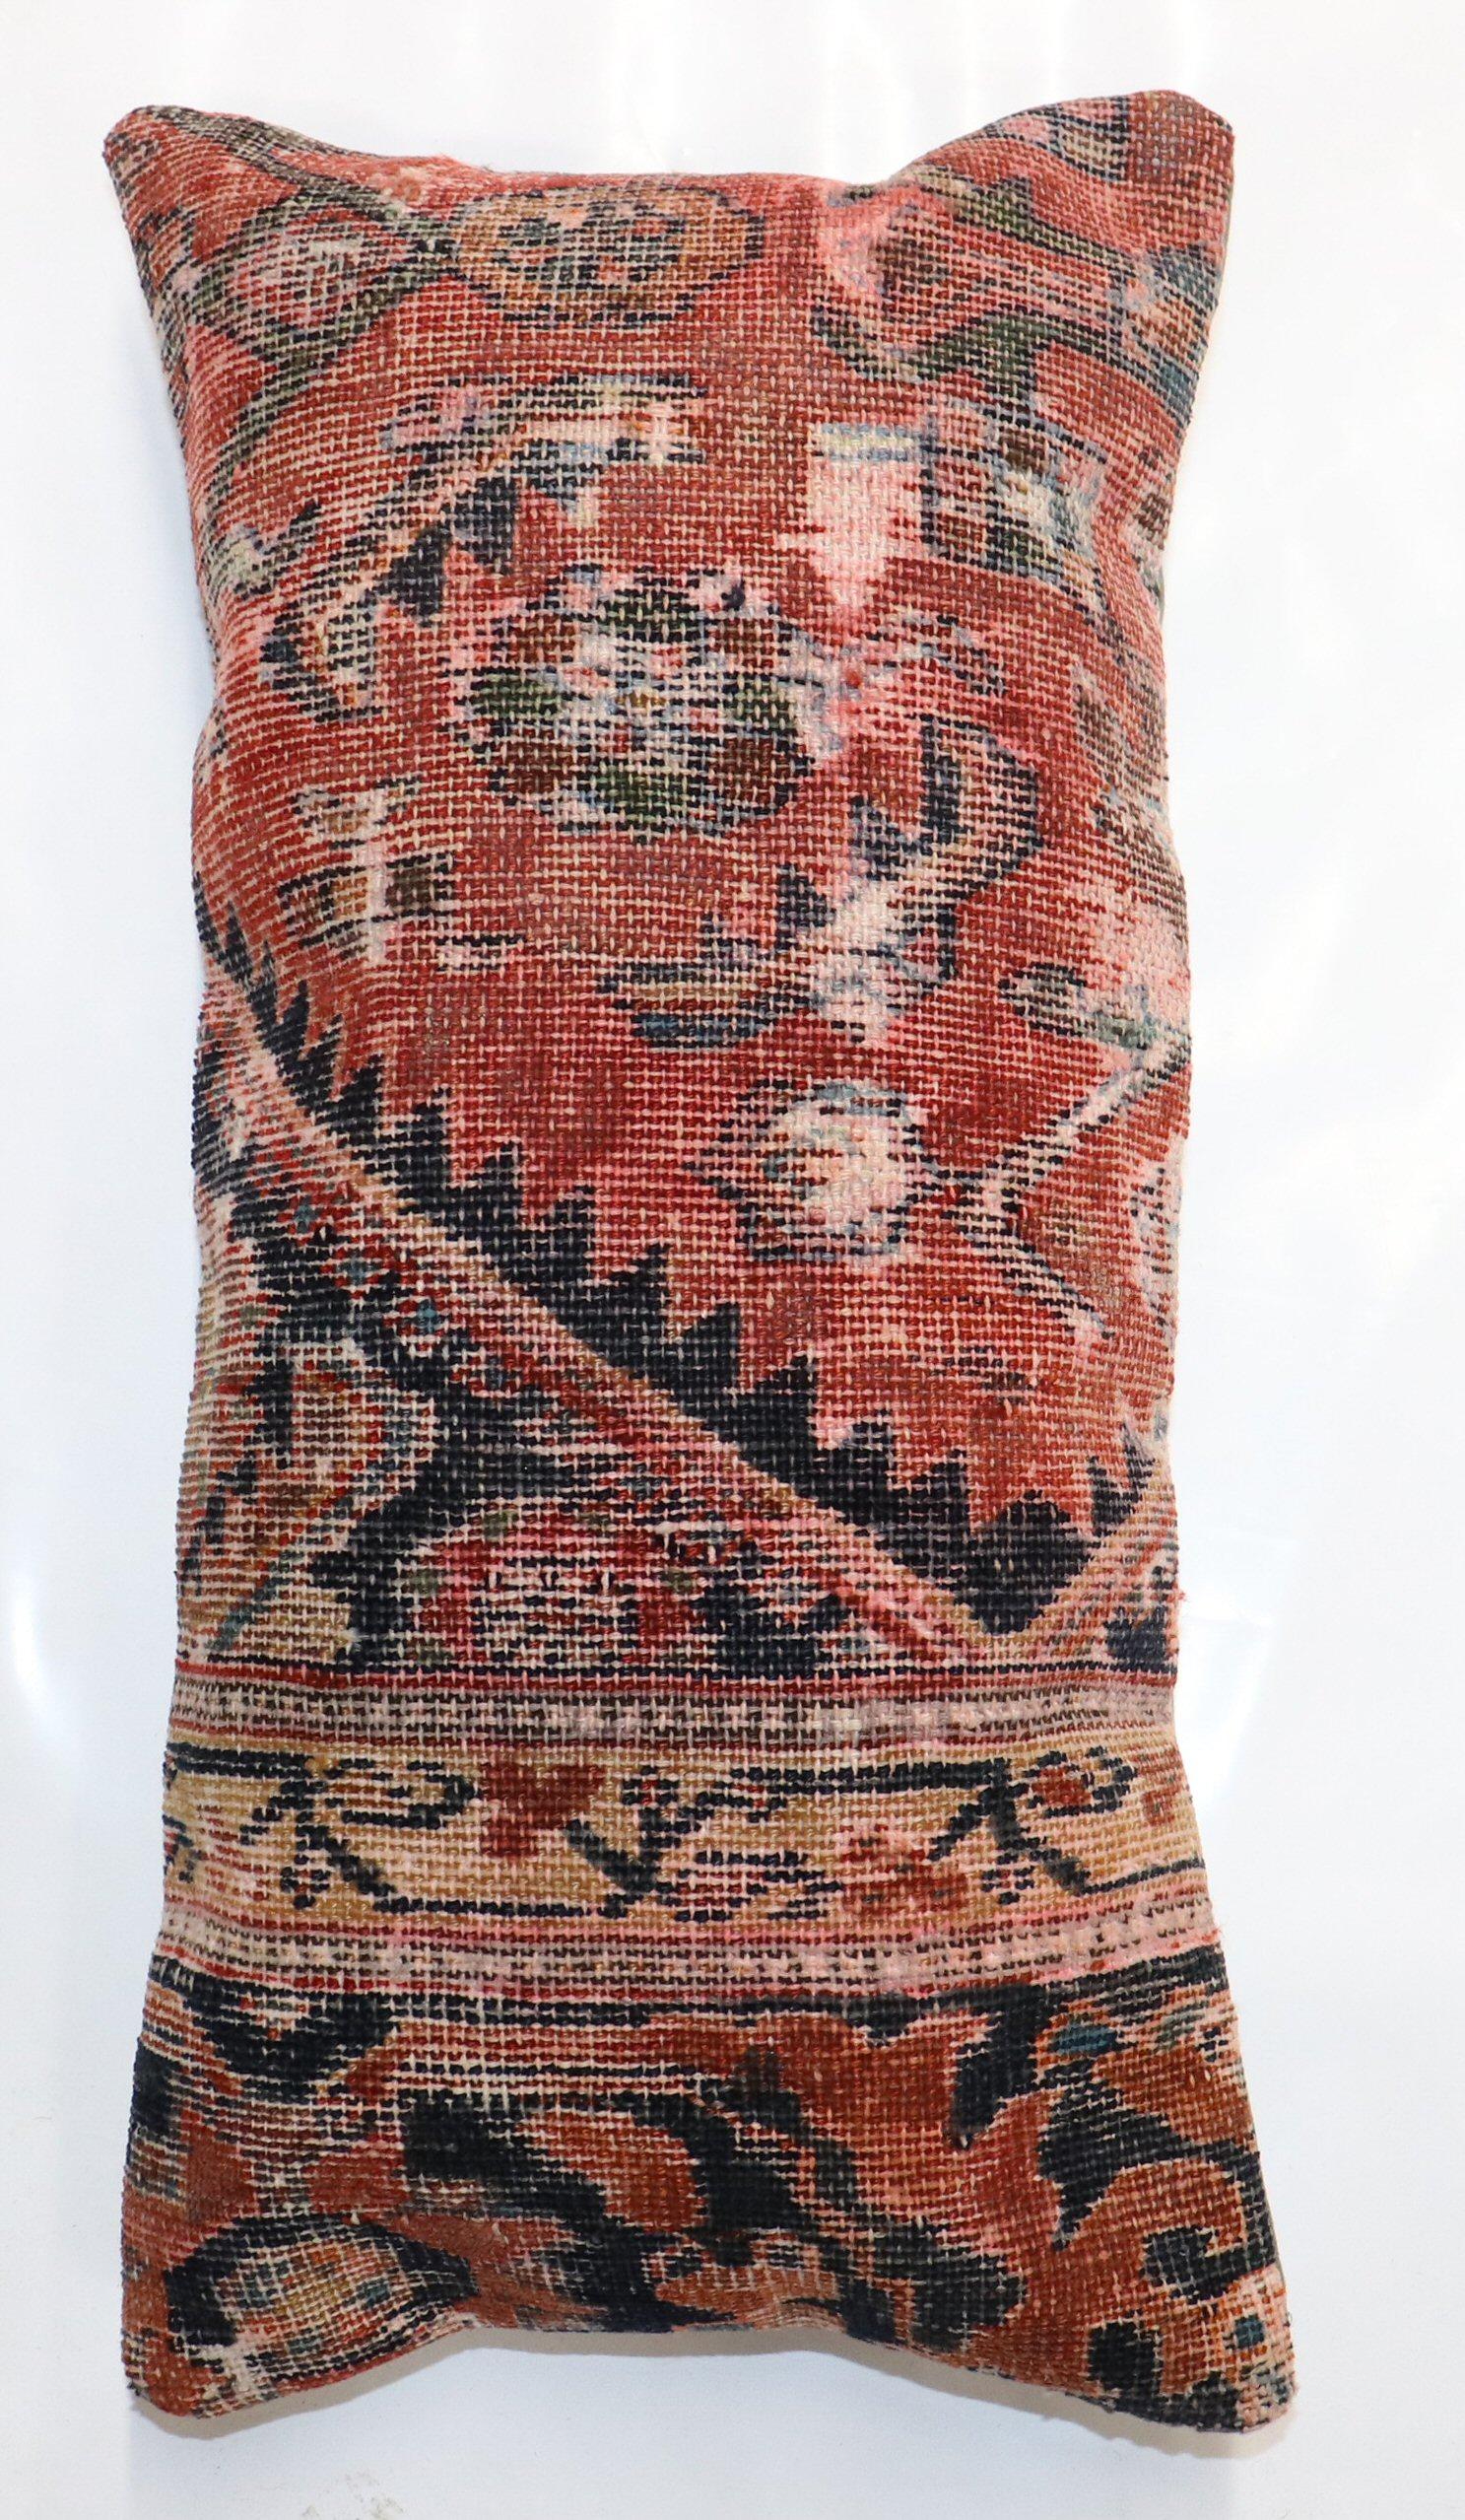 Pillow made from a 19th-century distressed Persian rug 

Measures: 10